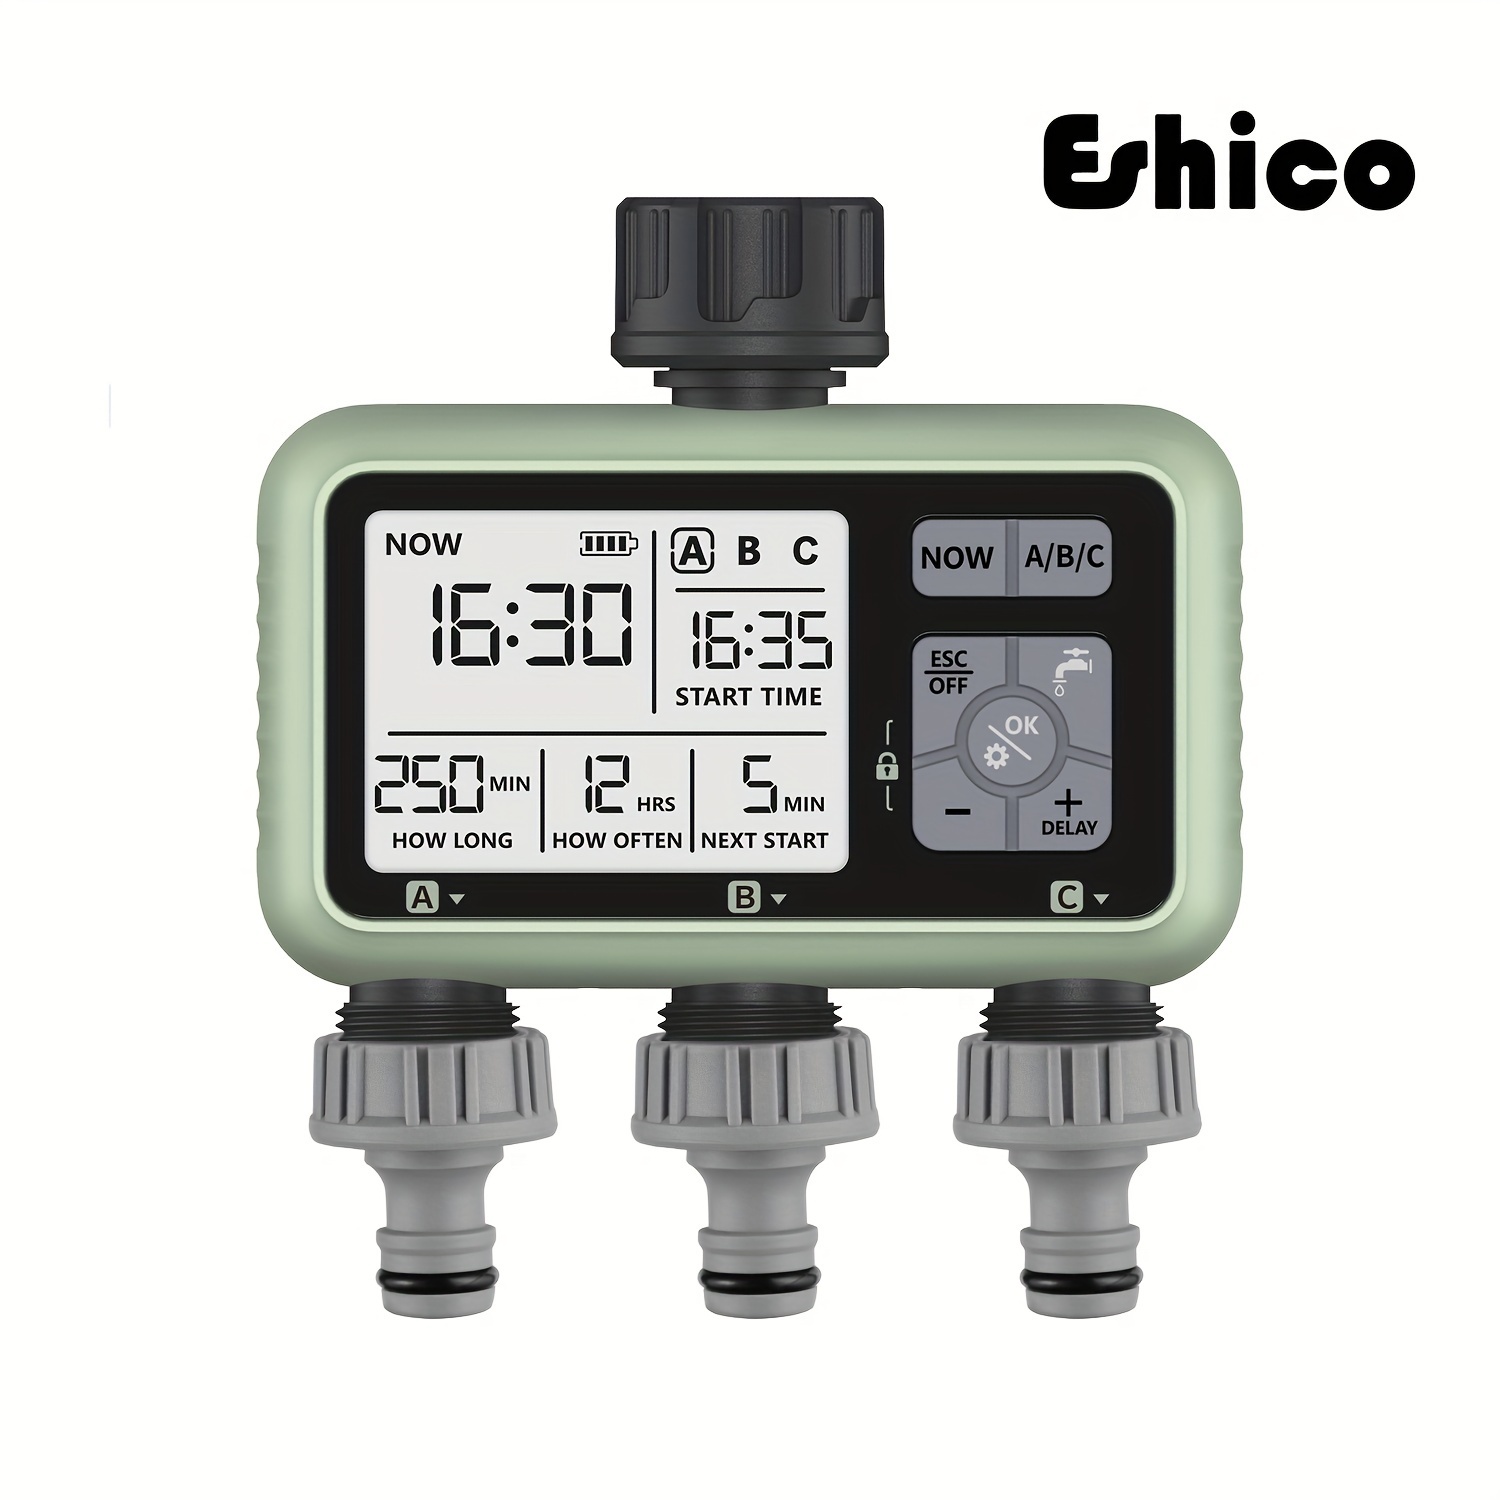 

1pc, Eshico 3-outlet Water Timer Garden Irrigation Tool For All Season Use 6.89 * 6.69 * 3.43 Inch Drip Water Seepage Device, Balcony Succulent Sprinkler, Shower Blossom